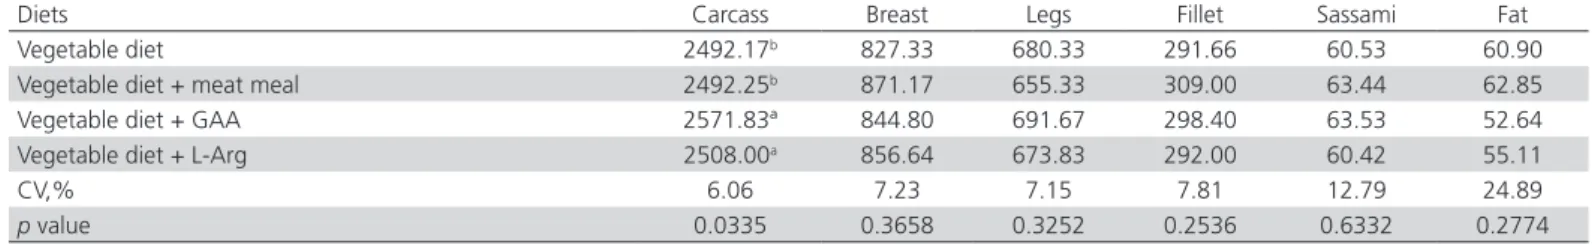 Table 4 – Carcass, commercial cuts and abdominal fat yield (%) of 44-day-old broilers age fed vegetable diets with meat  meal, GAA, or L-Arg and submitted to pre-slaughter heat stress.